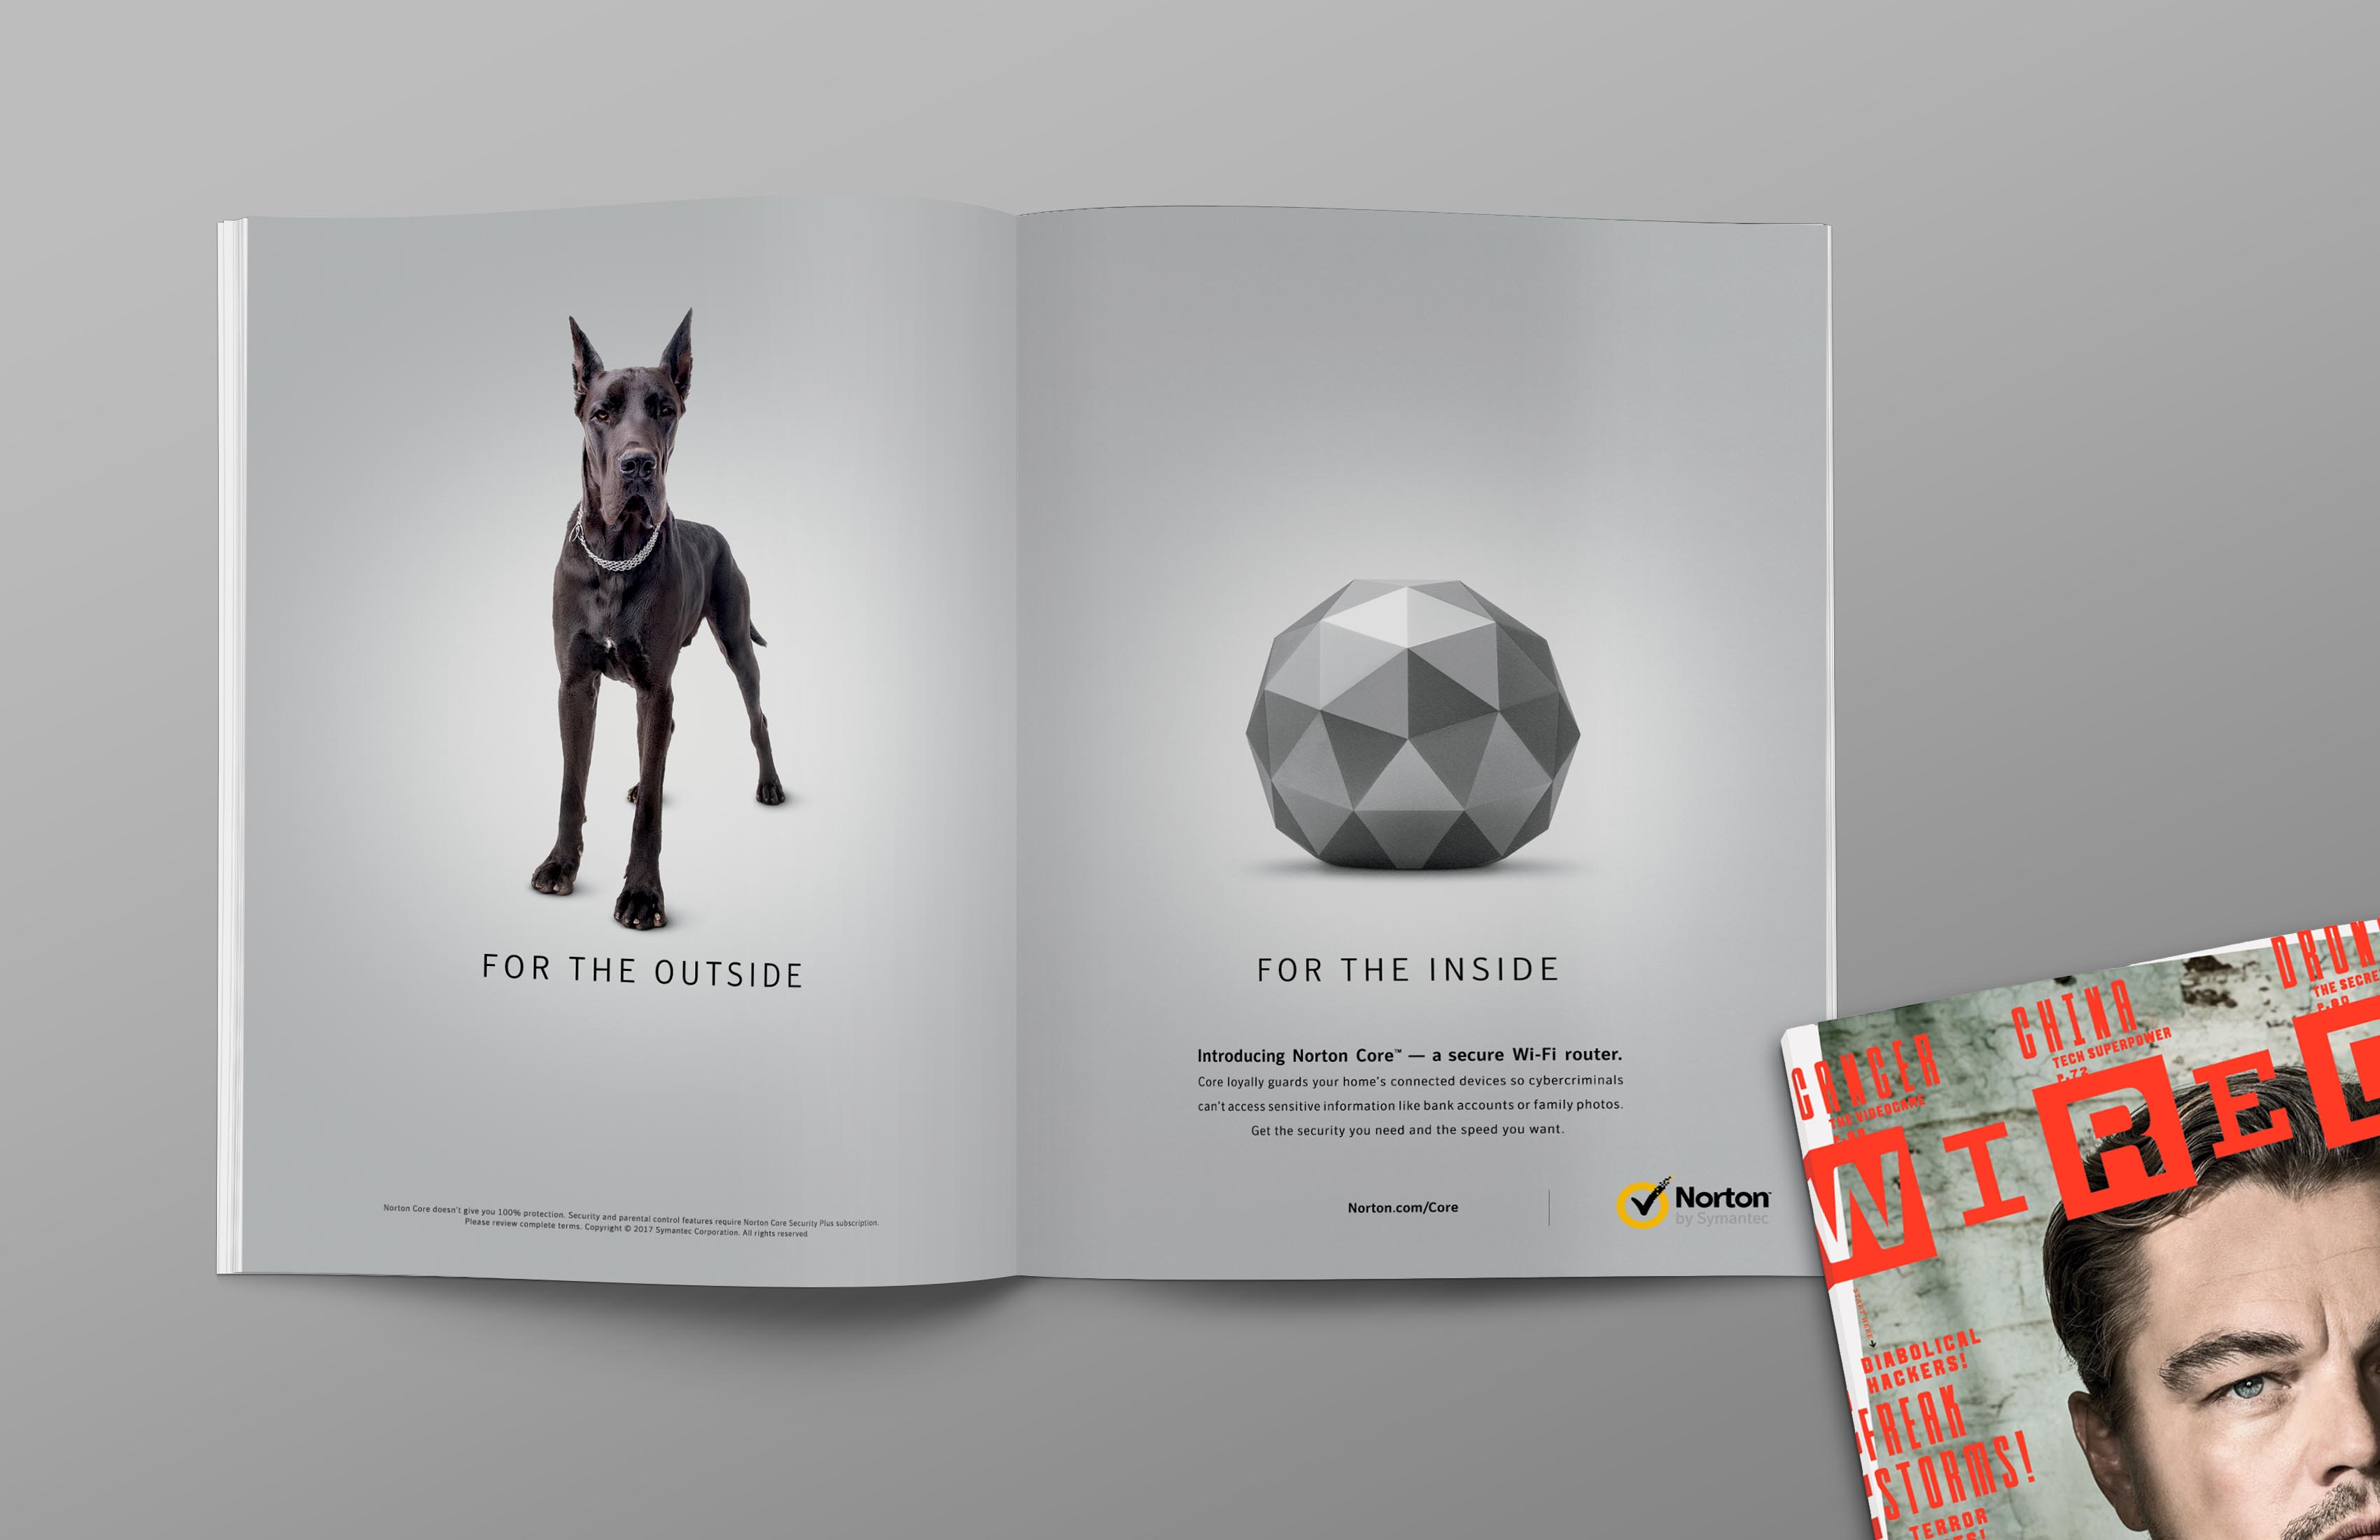 Top 10 Brilliant Print Ads to Inspire Your Next Marketing Campaign